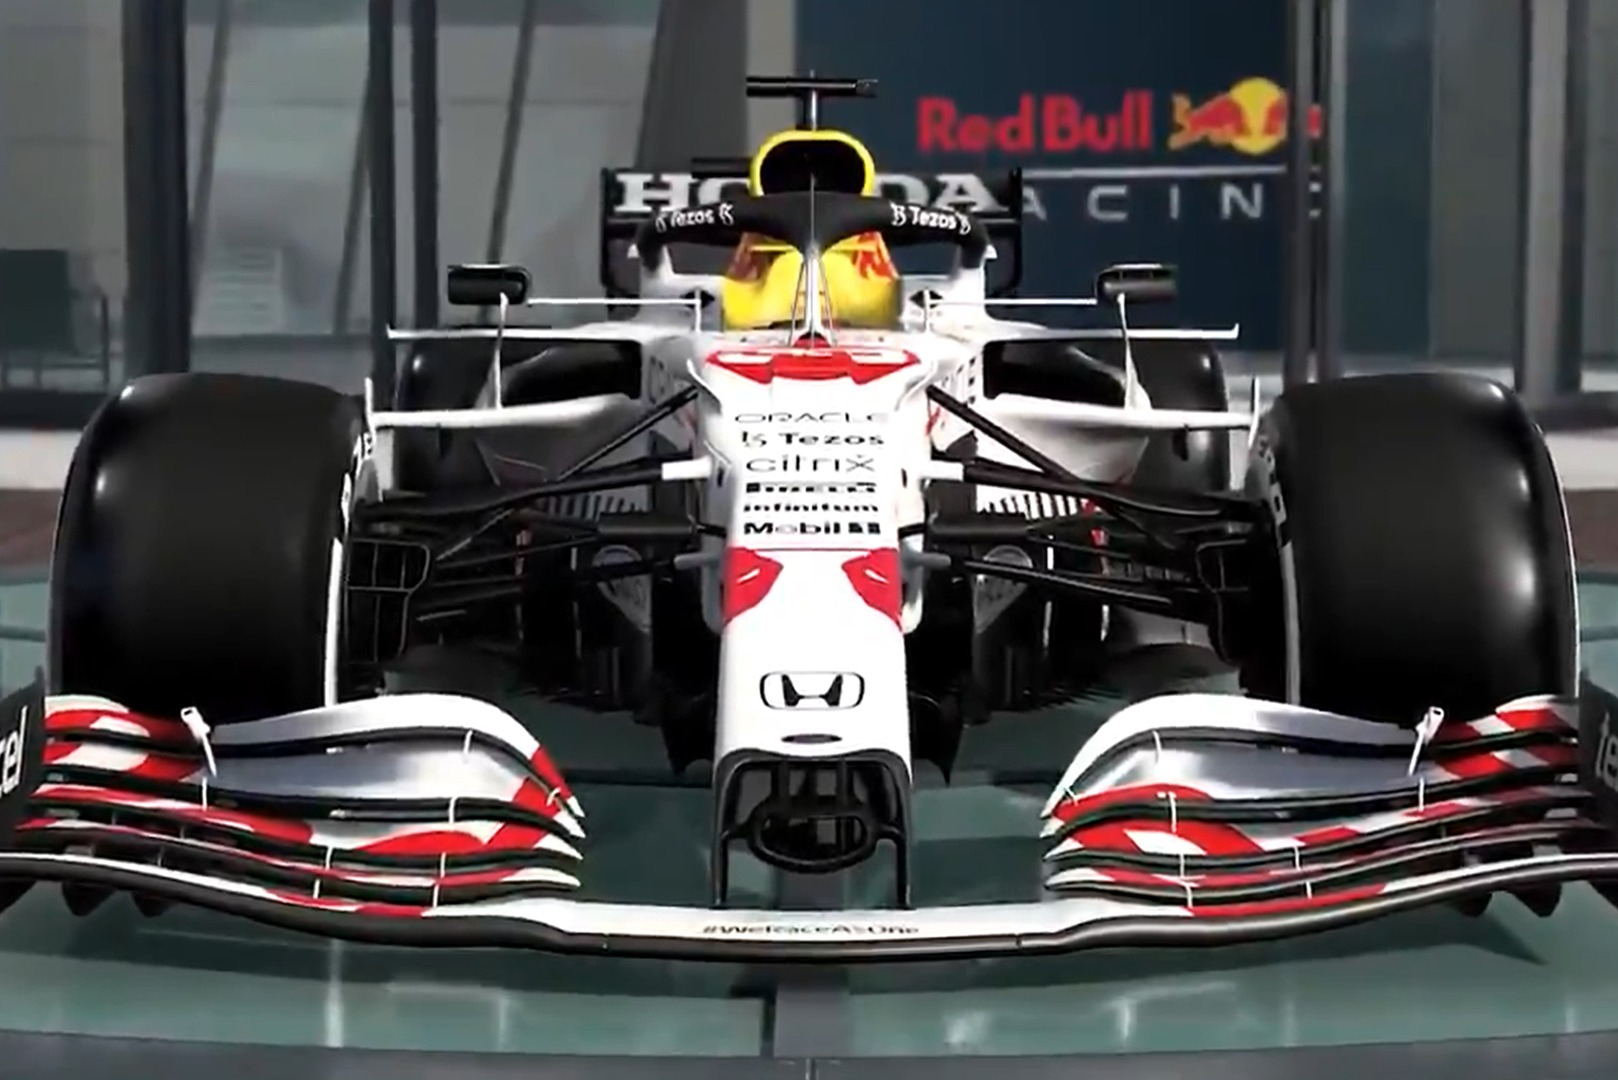 Red Bull's Honda tribute livery coming to F1 2021 game